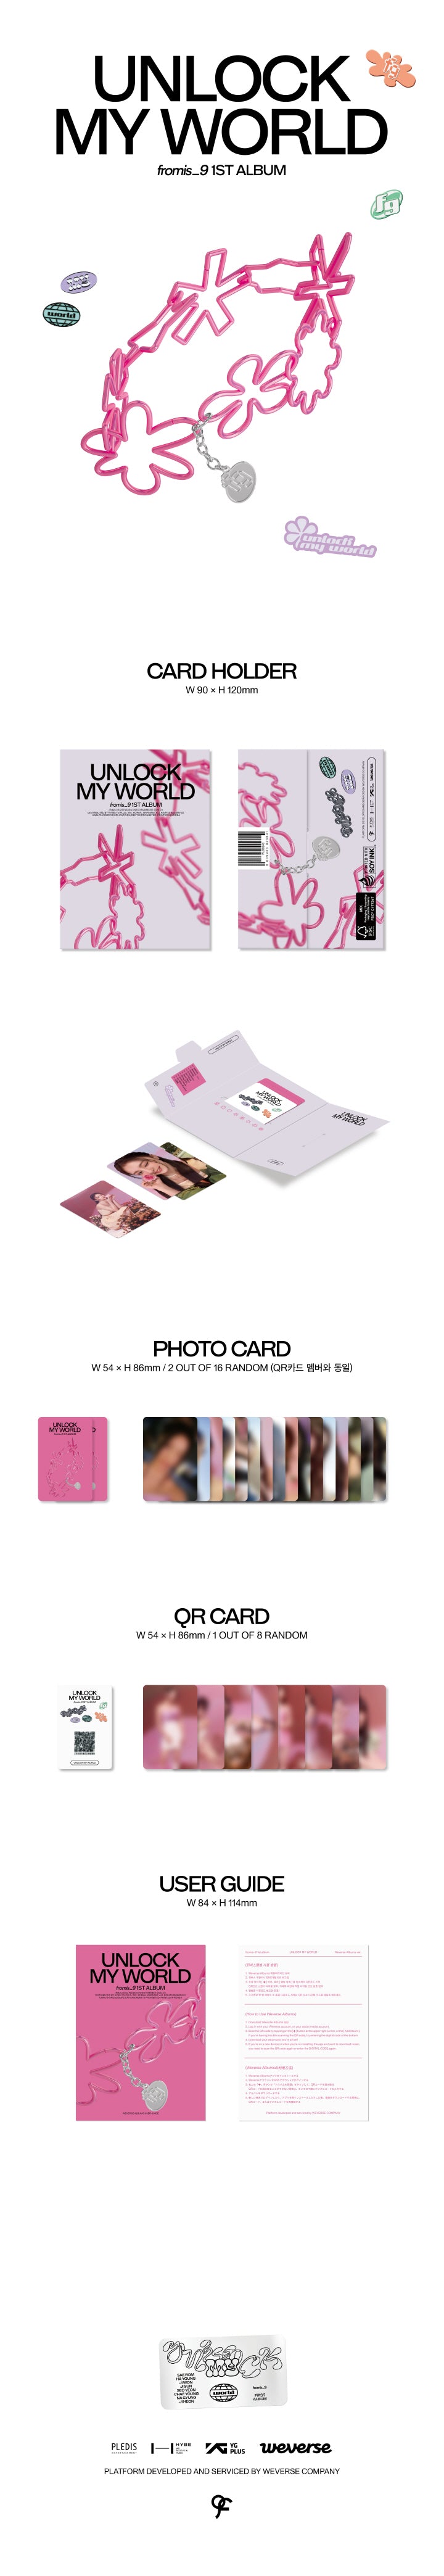 1 QR Card (random out of 8 types)
2 Photo Cards (random out of 16 types)